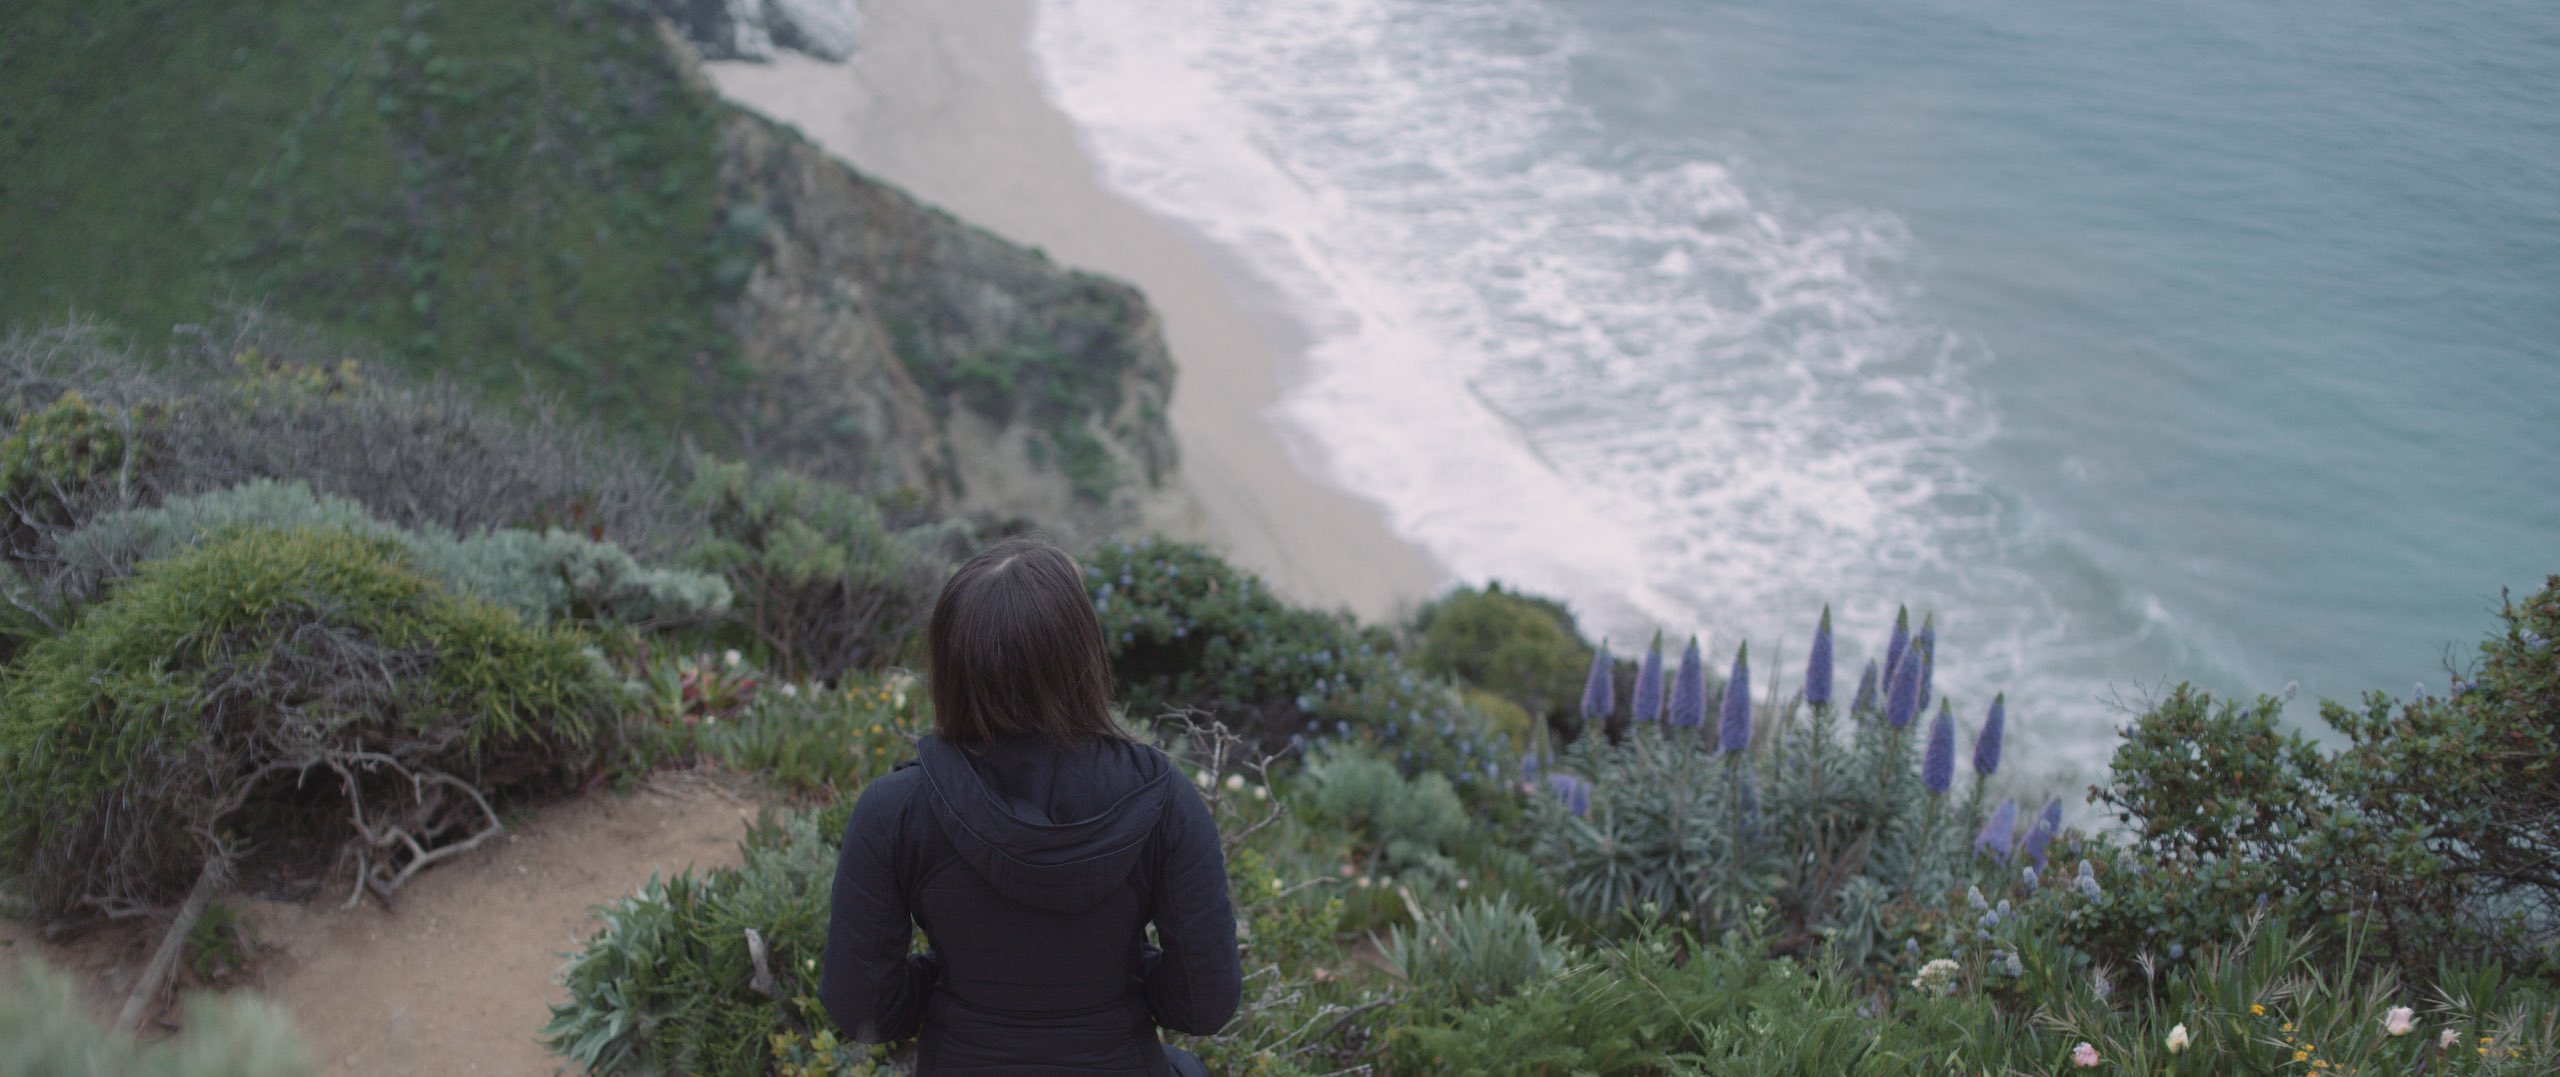 Dailies 203 Big Sur Video Production Company Los Angeles Stills View from behind of woman looking over the coastline